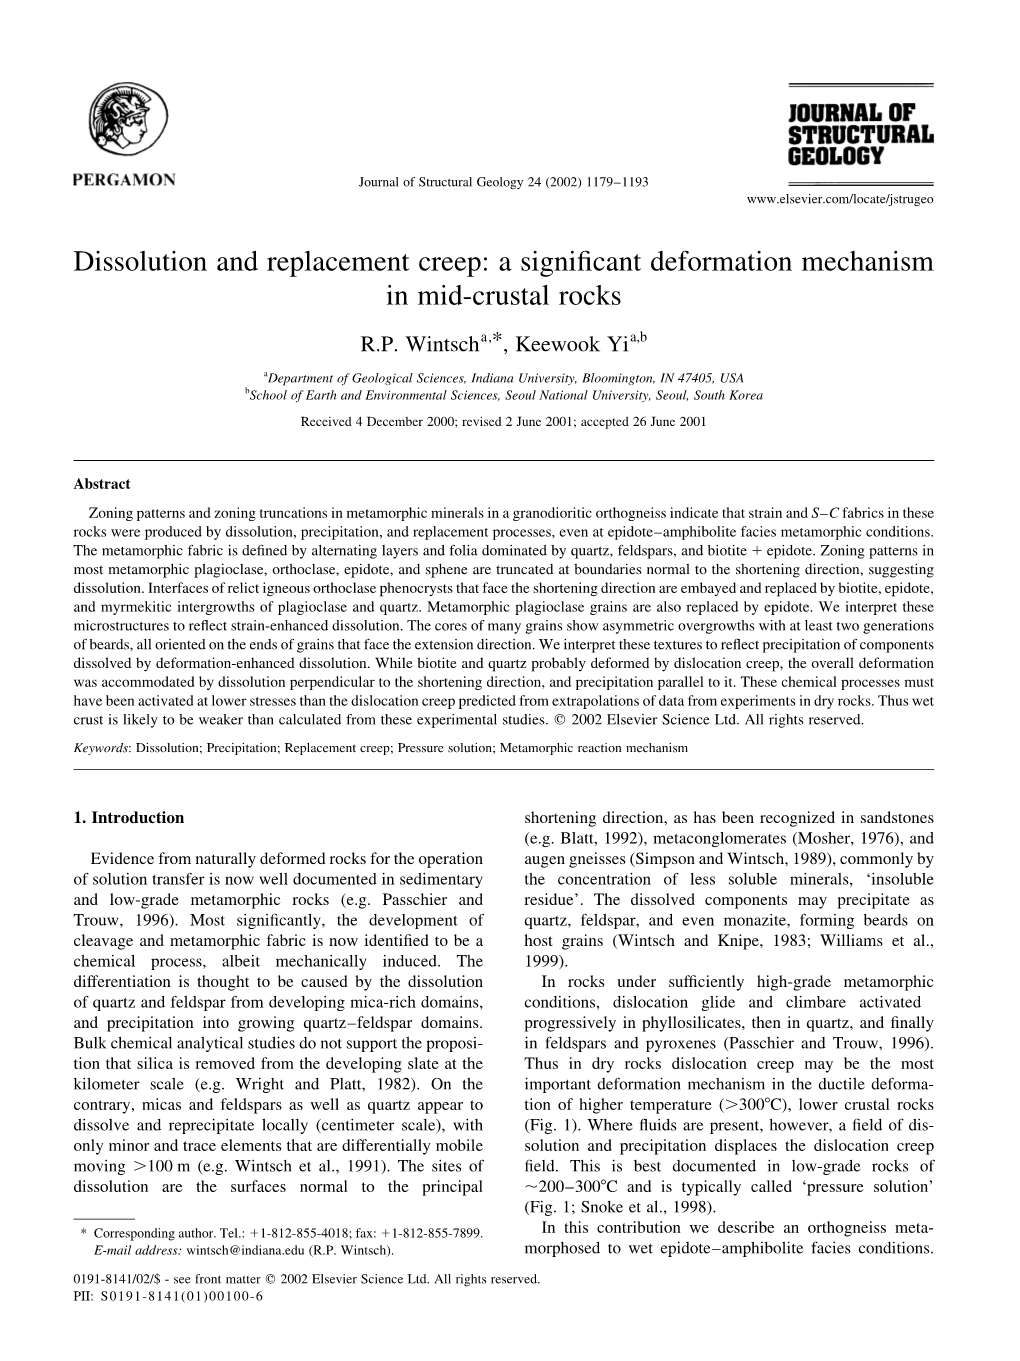 Dissolution and Replacement Creep: a Significant Deformation Mechanism